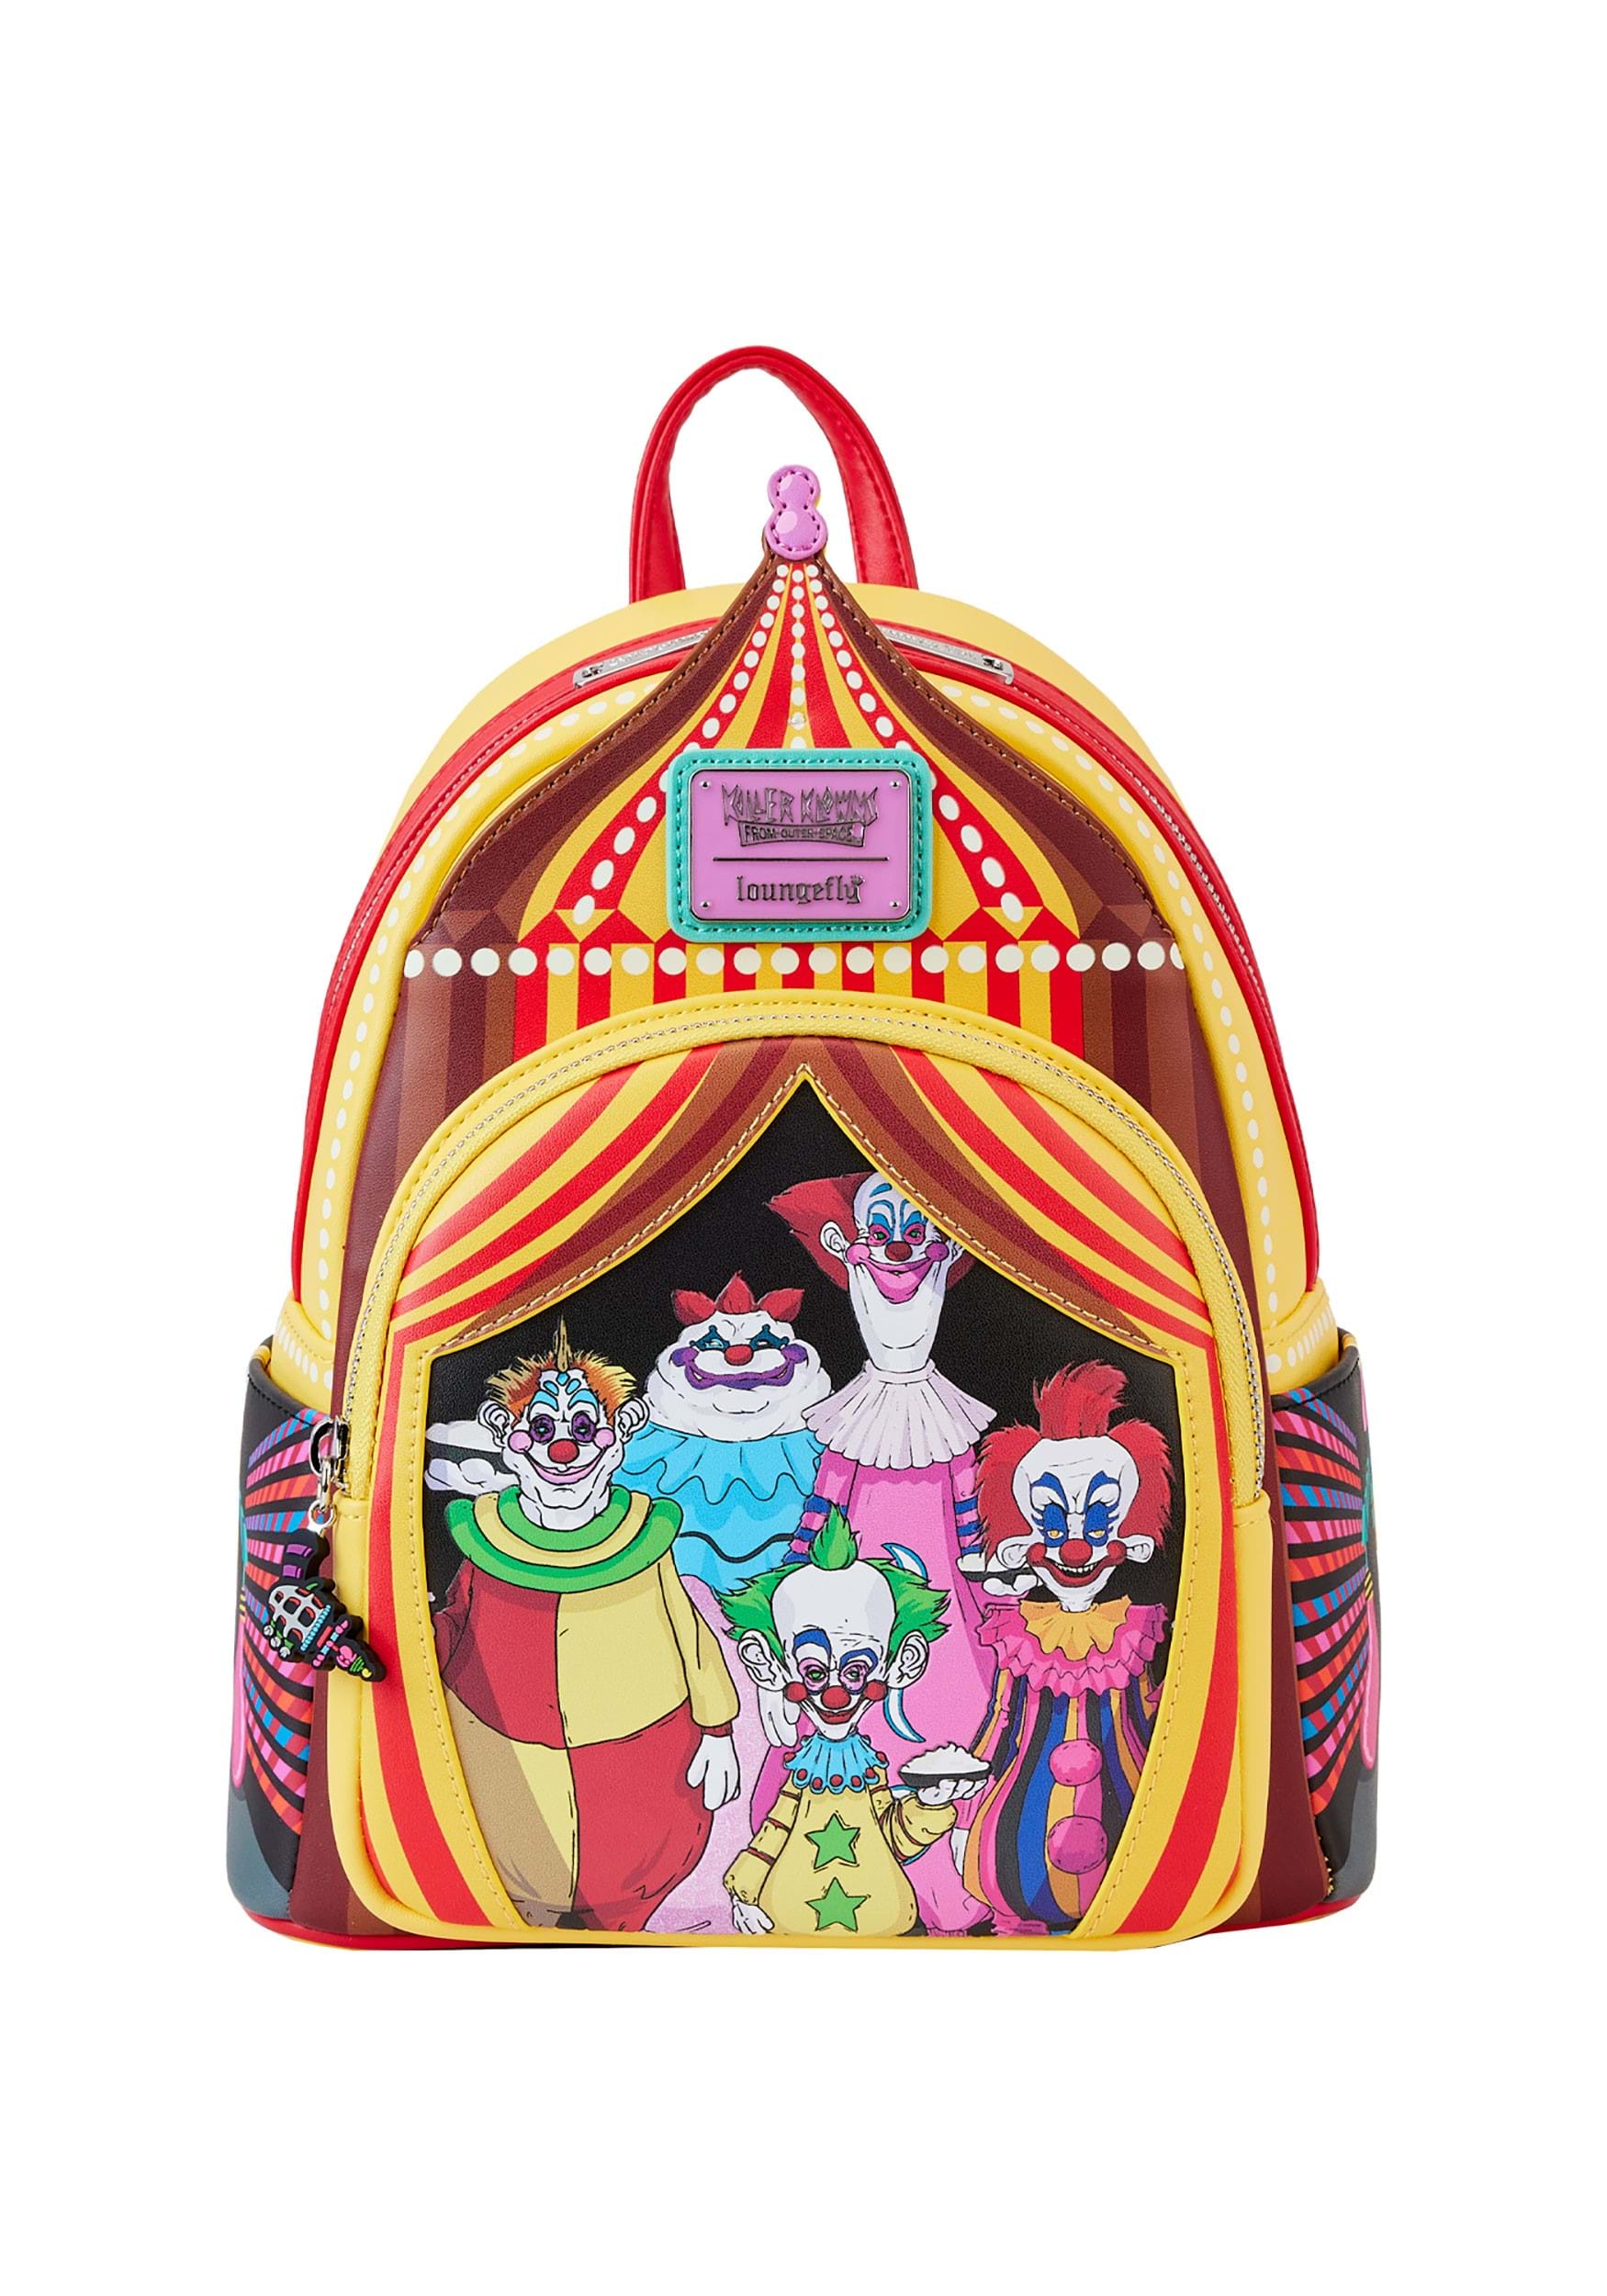 MGM Killer Klowns from Outer Space Mini Backpack by Loungefly